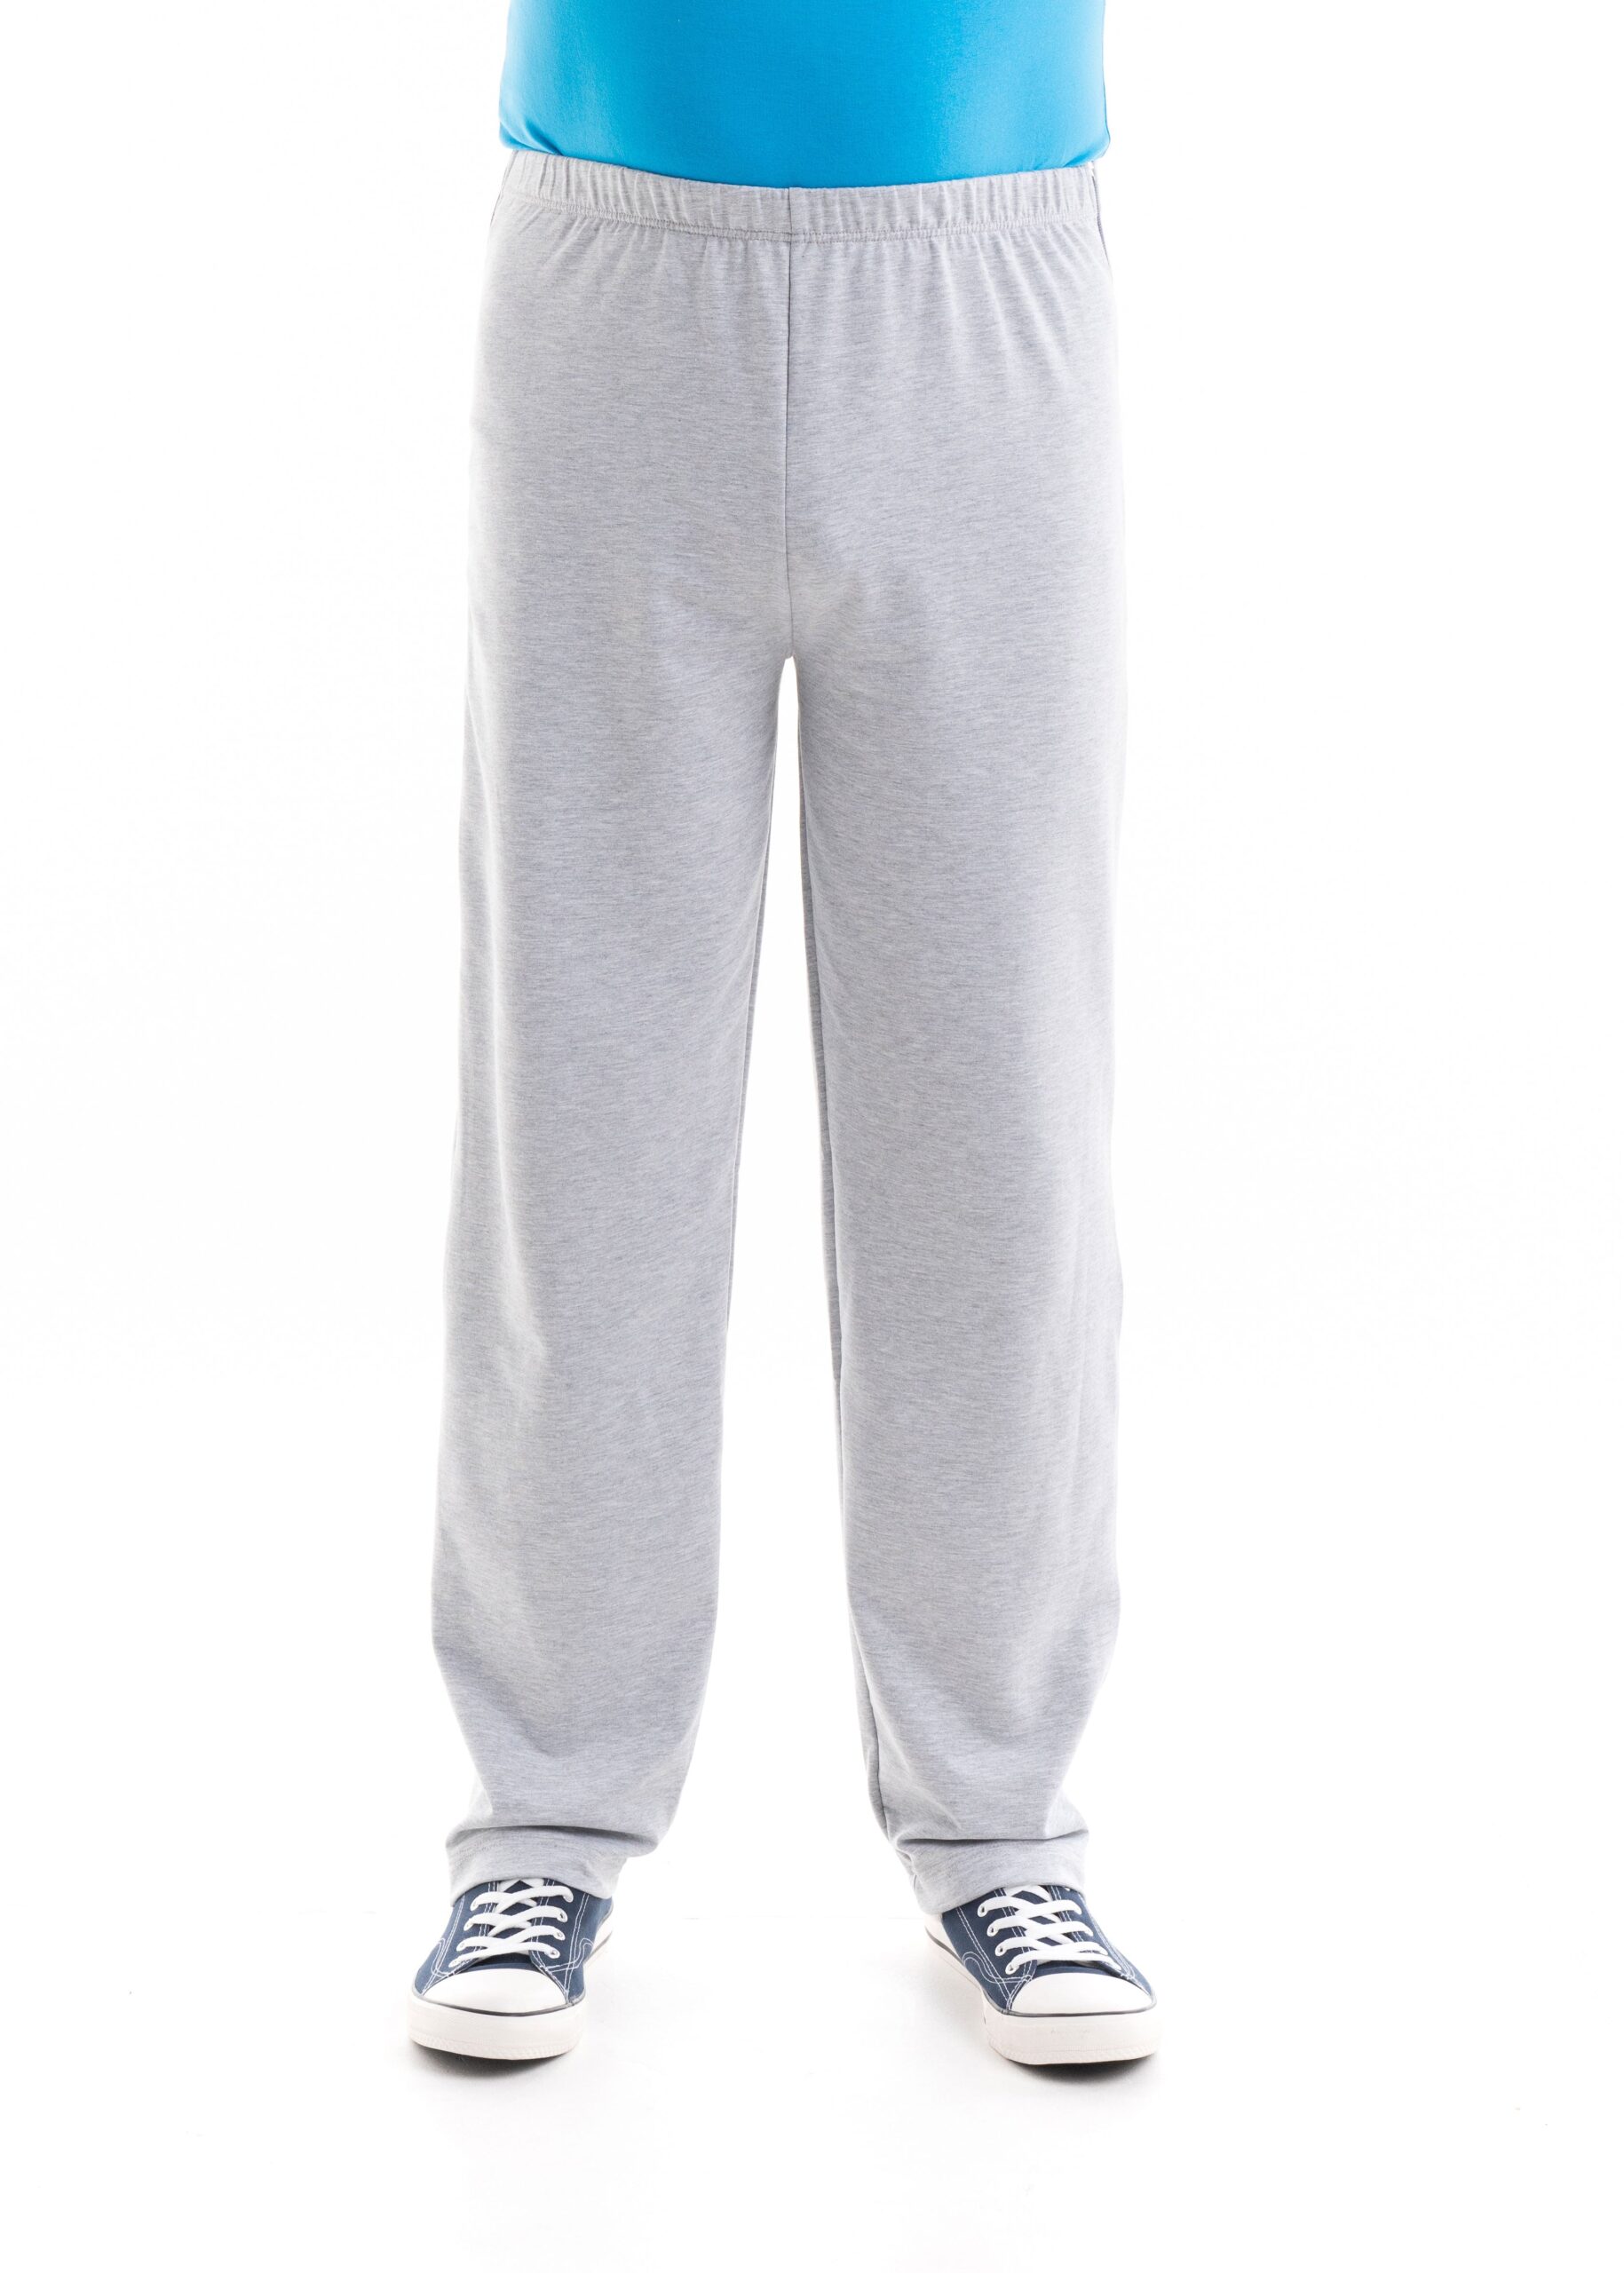 Men's Tracksuit Bottoms with full side zips